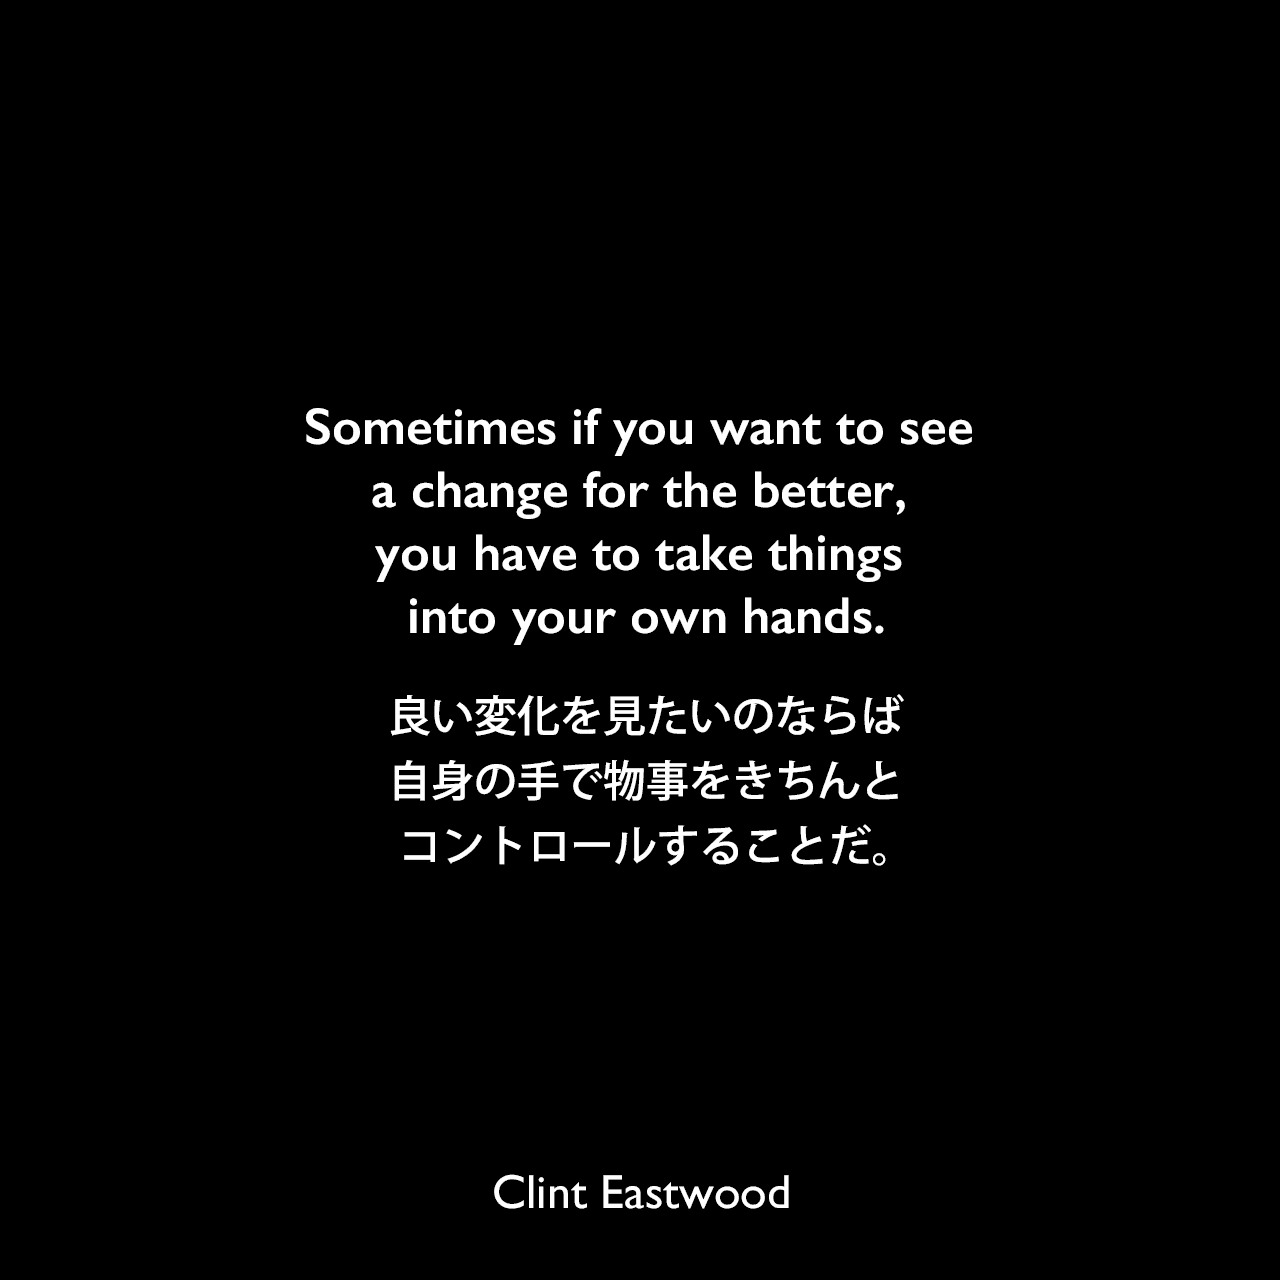 Sometimes if you want to see a change for the better, you have to take things into your own hands.良い変化を見たいのならば、自身の手で物事をきちんとコントロールすることだ。Clint Eastwood